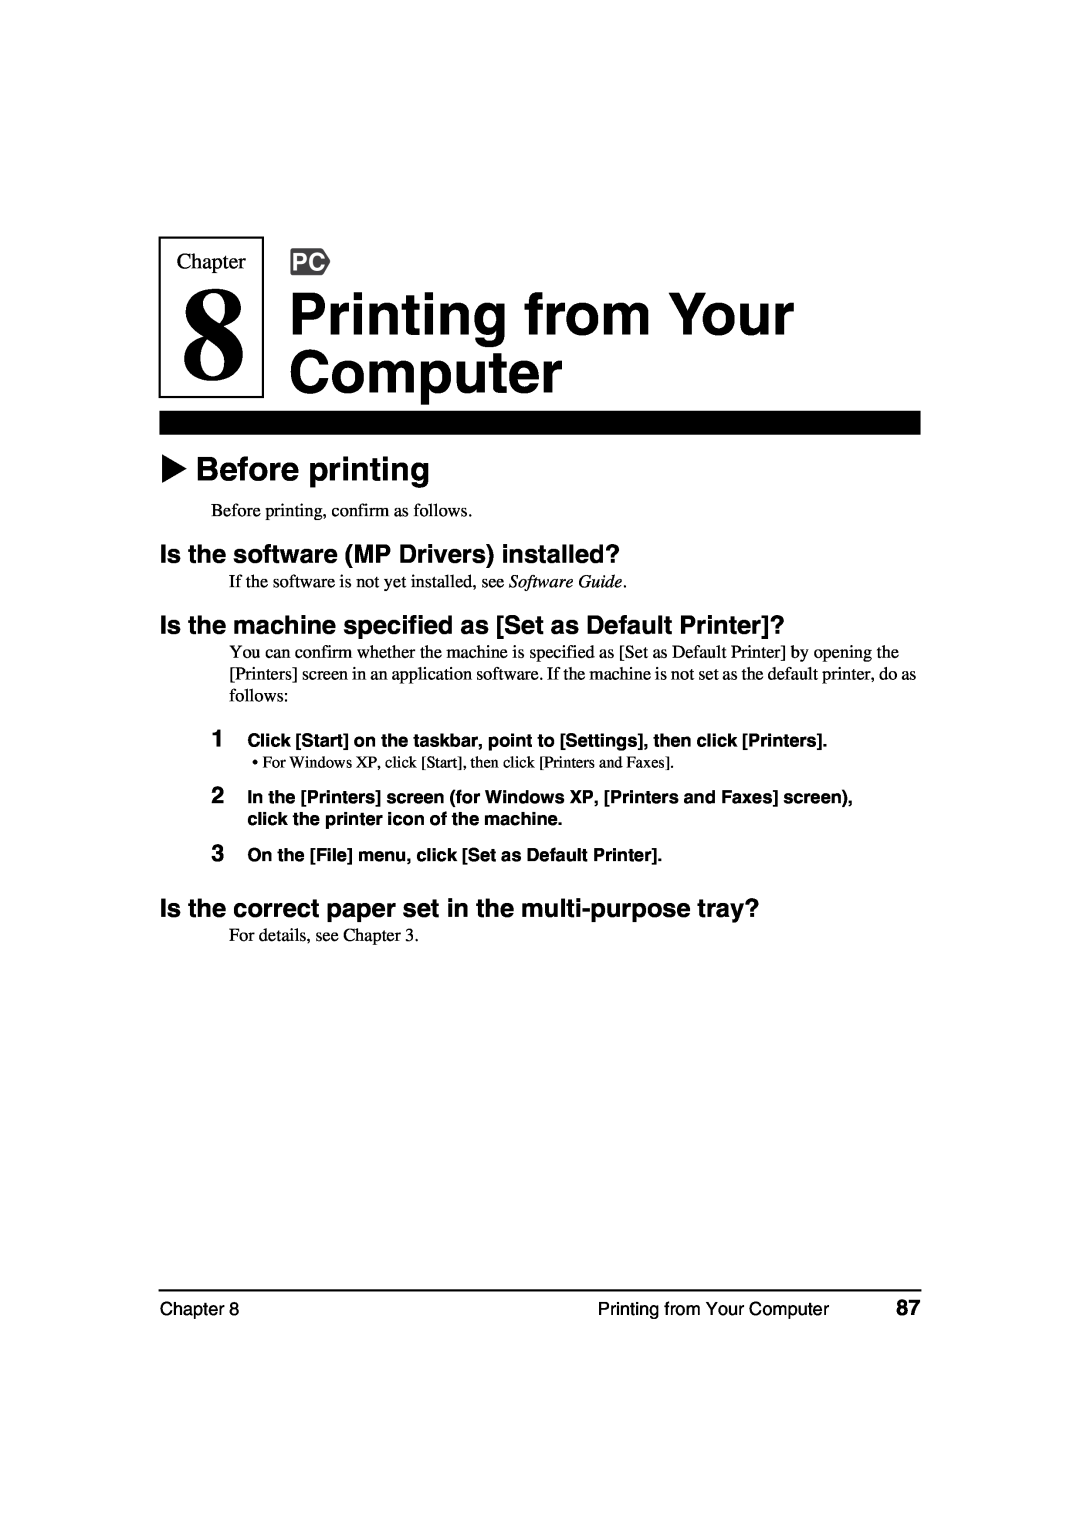 Canon MP370, MP360 manual Printing from Your Computer, Before printing, Is the software MP Drivers installed?, Chapter 